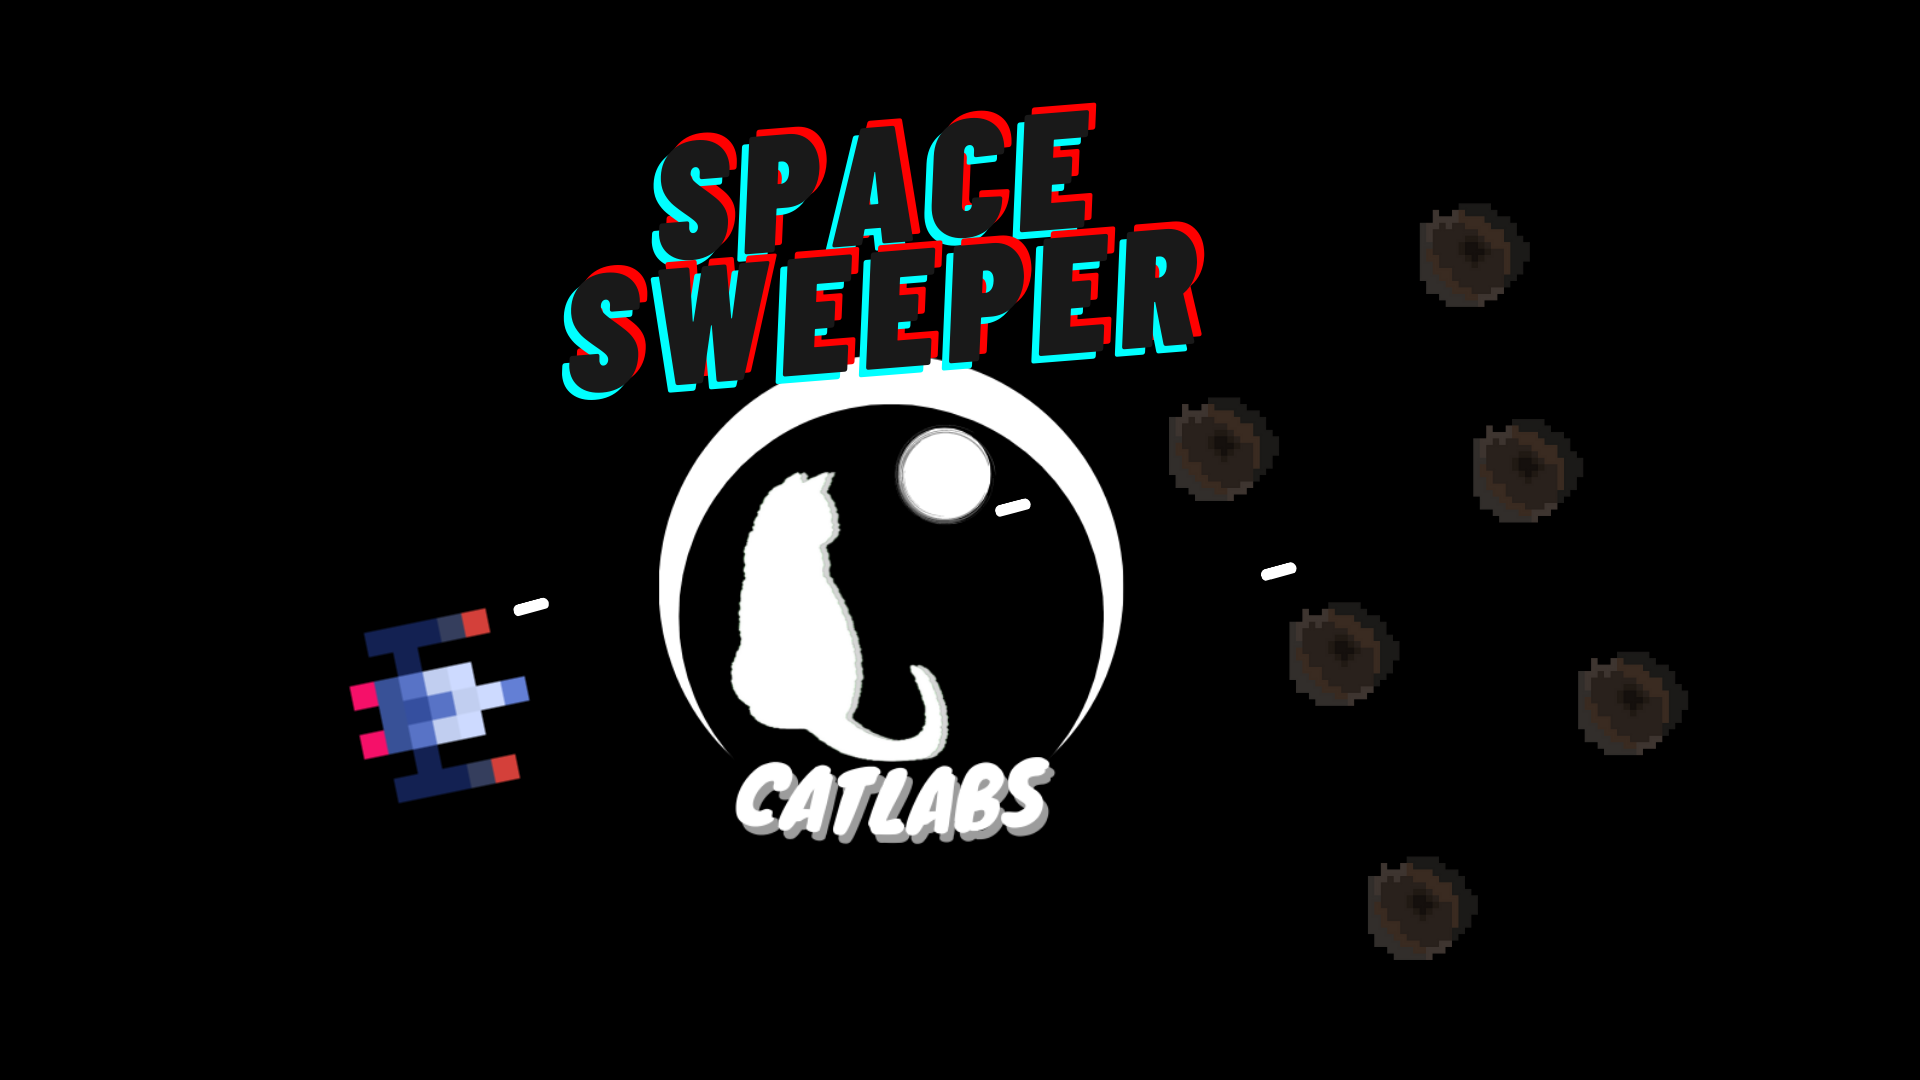 Space sweeper